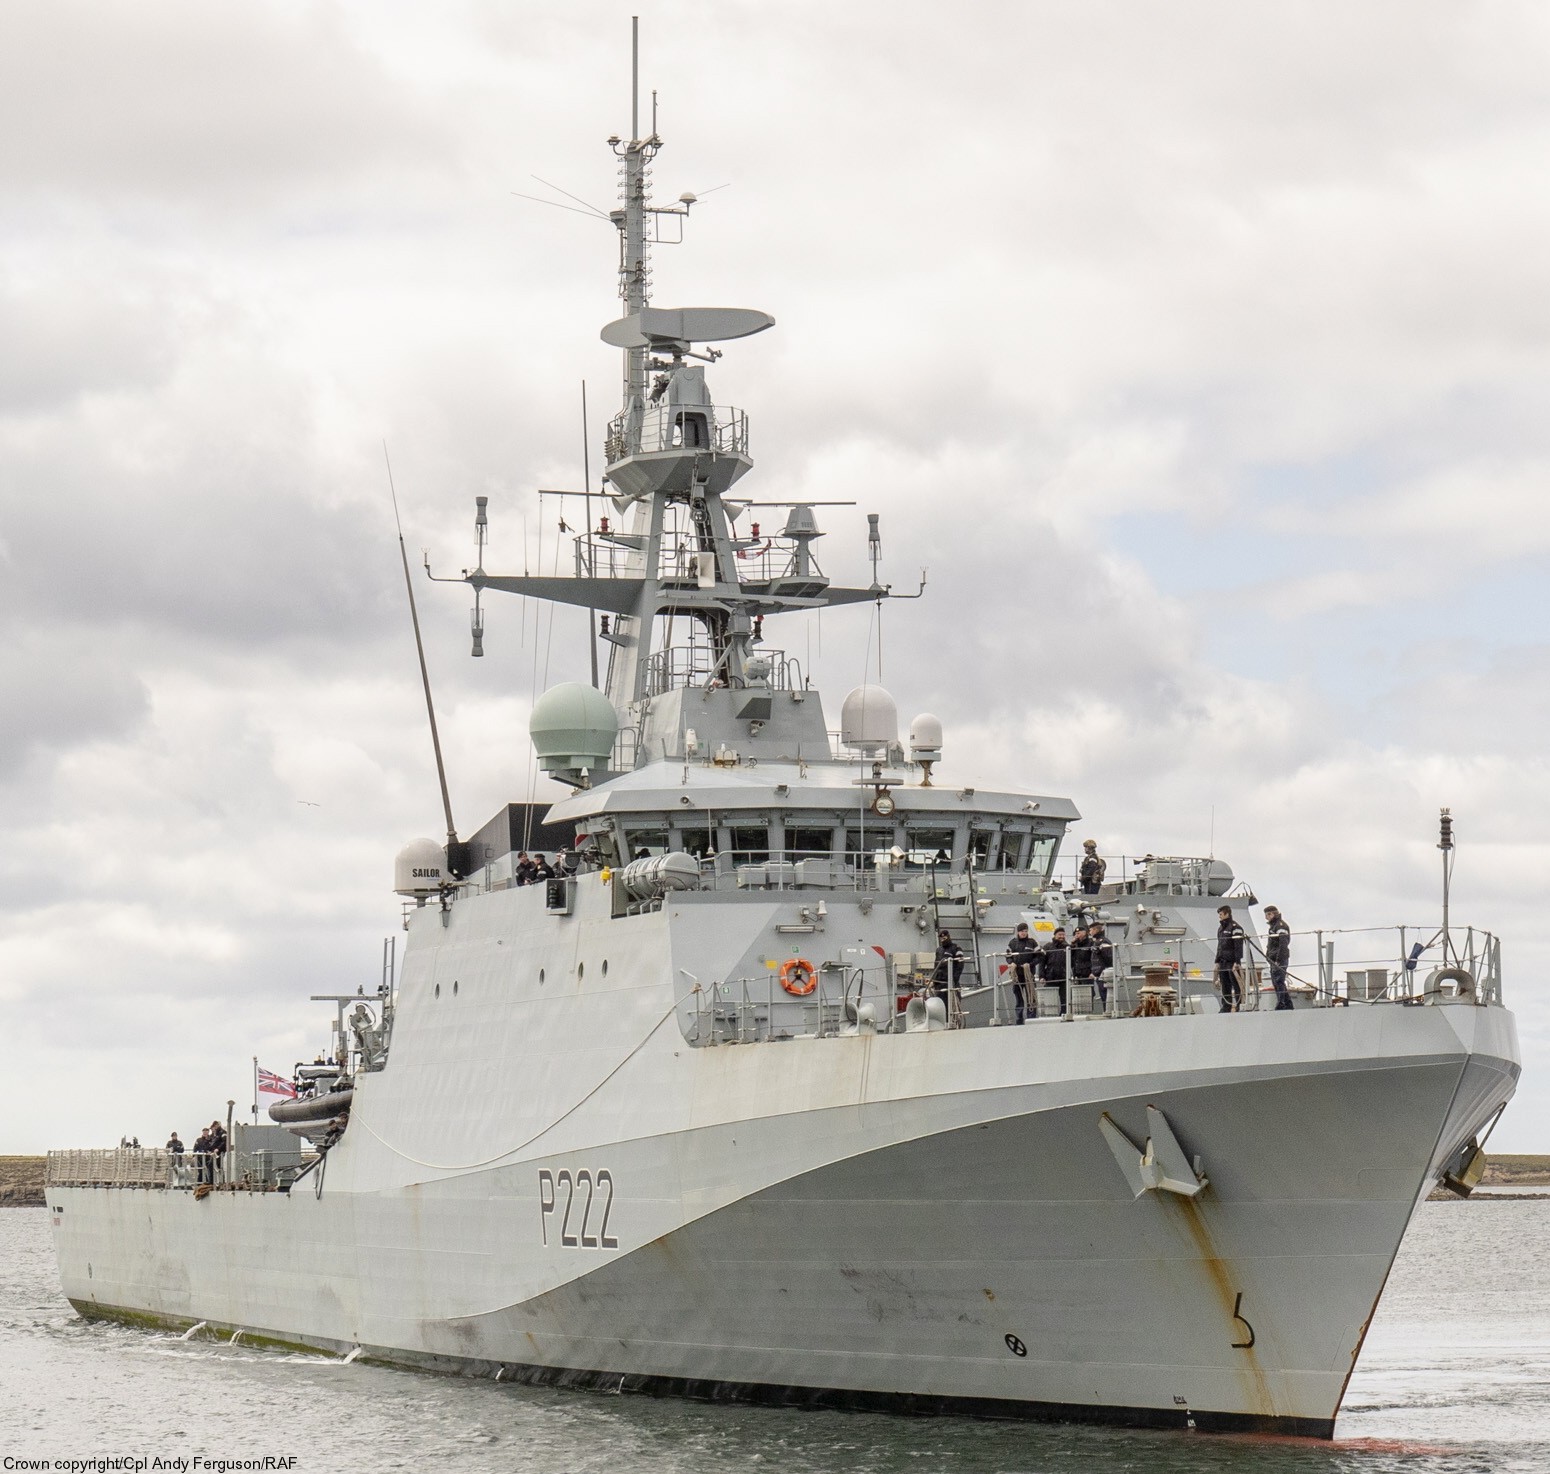 p-222 hms forth river class offshore patrol vessel opv royal navy 06